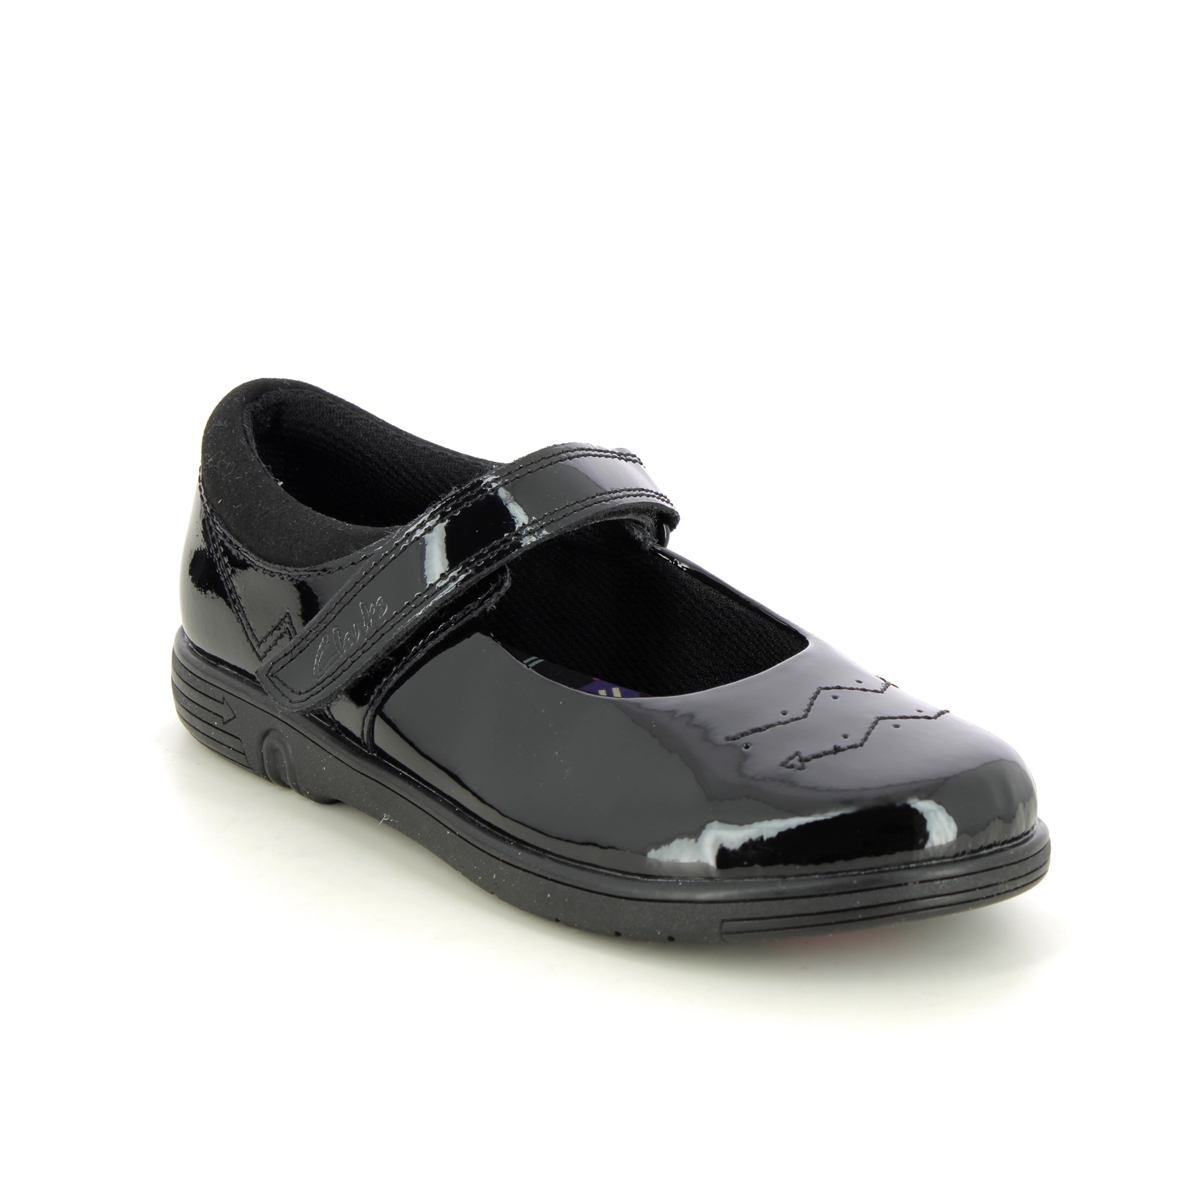 Clarks Jazzy Jig K Mary Jane Black patent Kids girls school shoes 7530-87G in a Plain Leather in Size 11.5